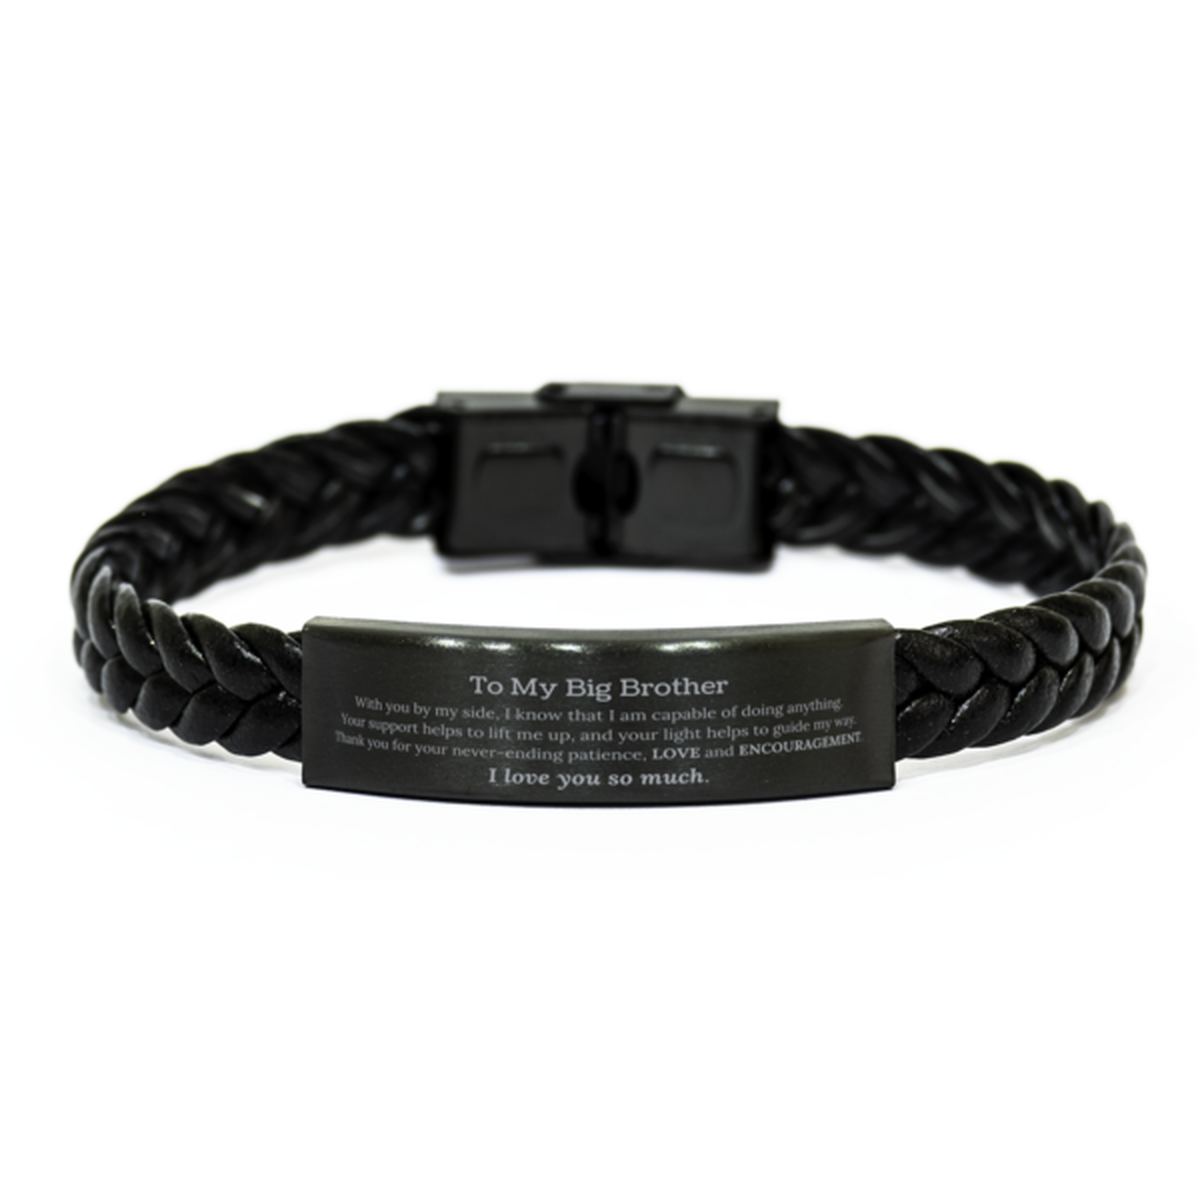 Appreciation Big Brother Braided Leather Bracelet Gifts, To My Big Brother Birthday Christmas Wedding Keepsake Gifts for Big Brother With you by my side, I know that I am capable of doing anything. I love you so much